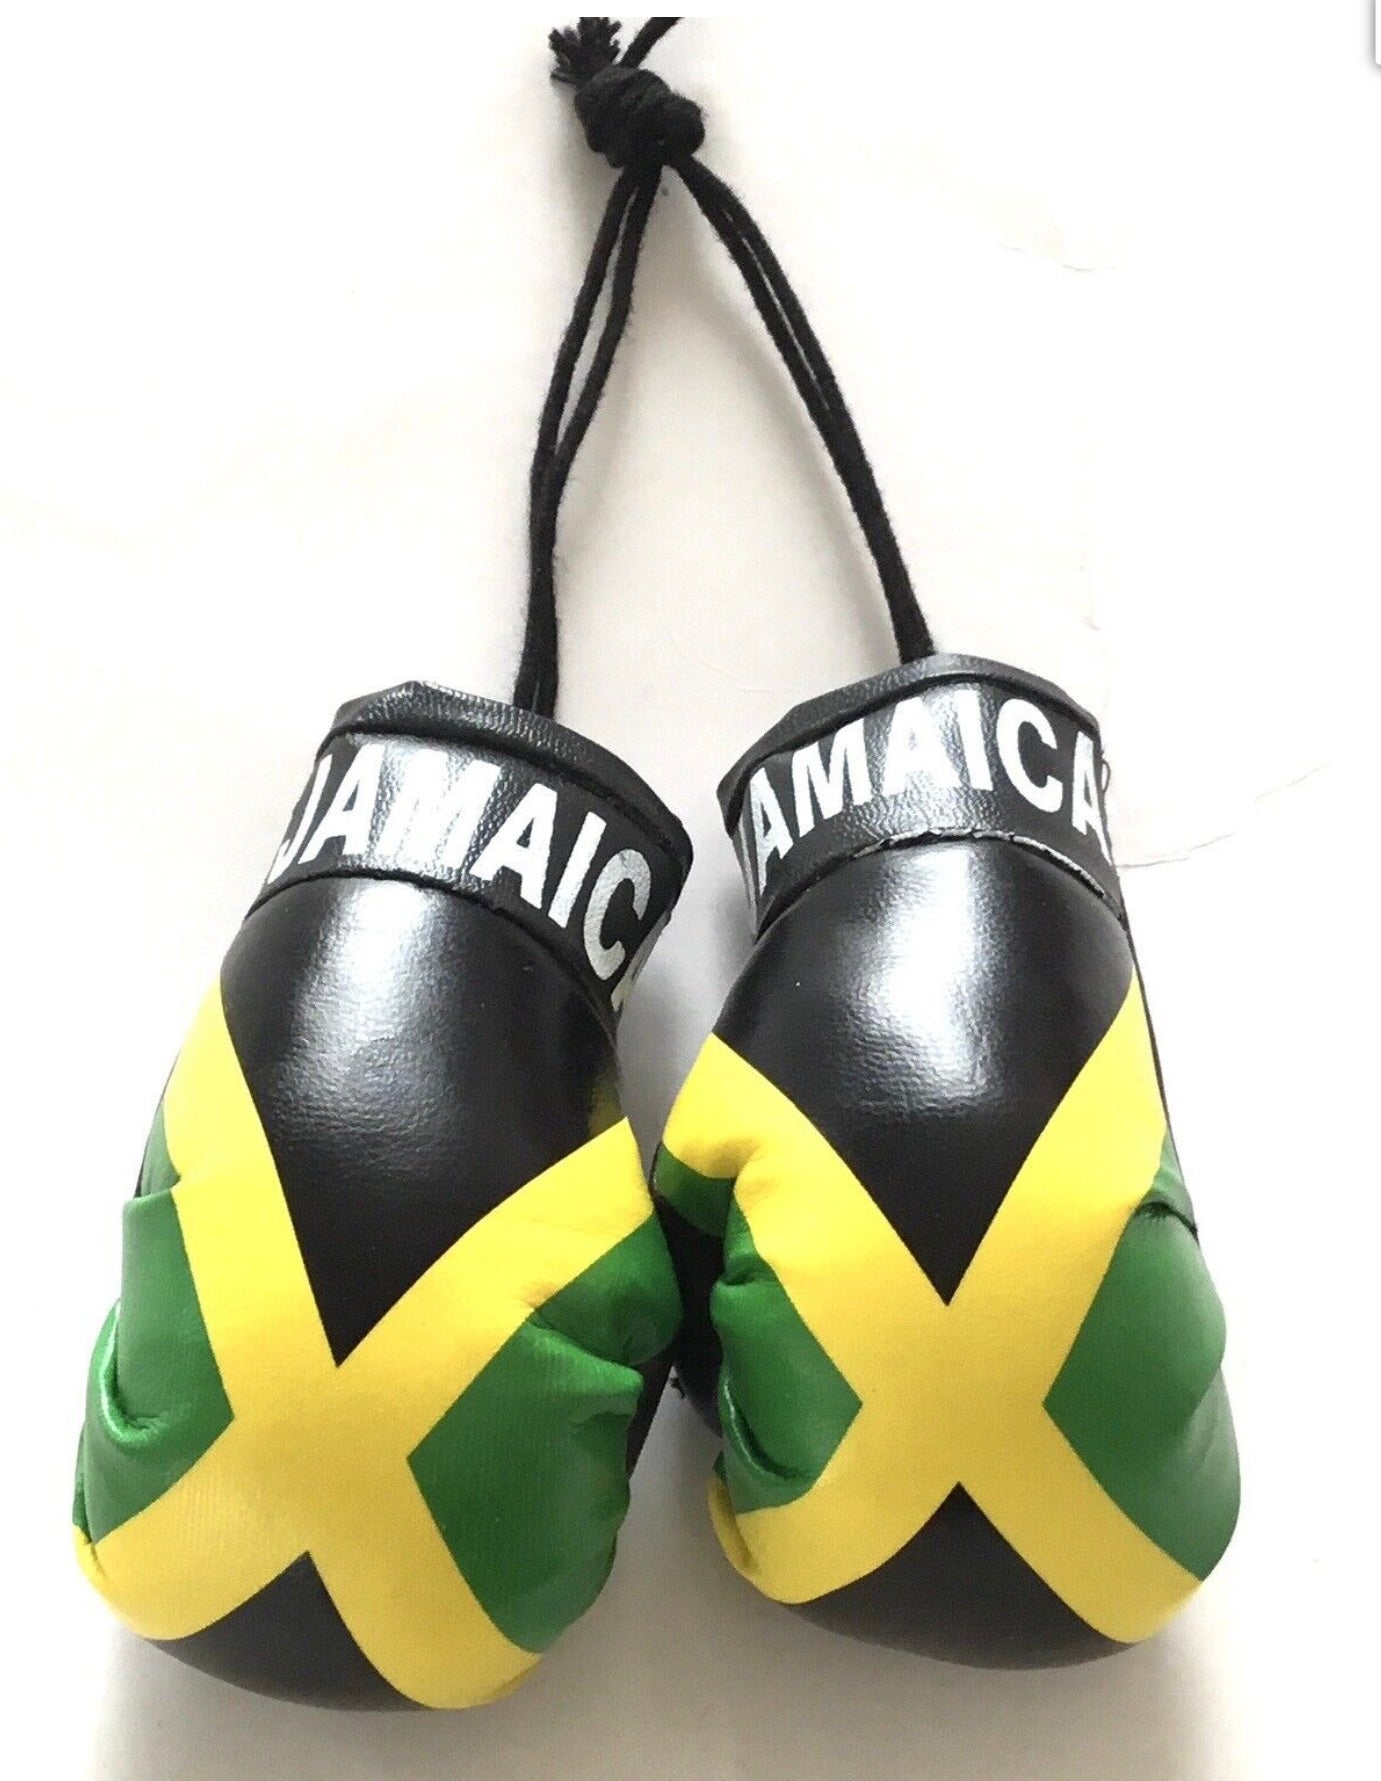 JAMAICA PAIR BOXING GLOVES FOR HANGING IN THE CAR OR OFFICE 10 X 8 CM